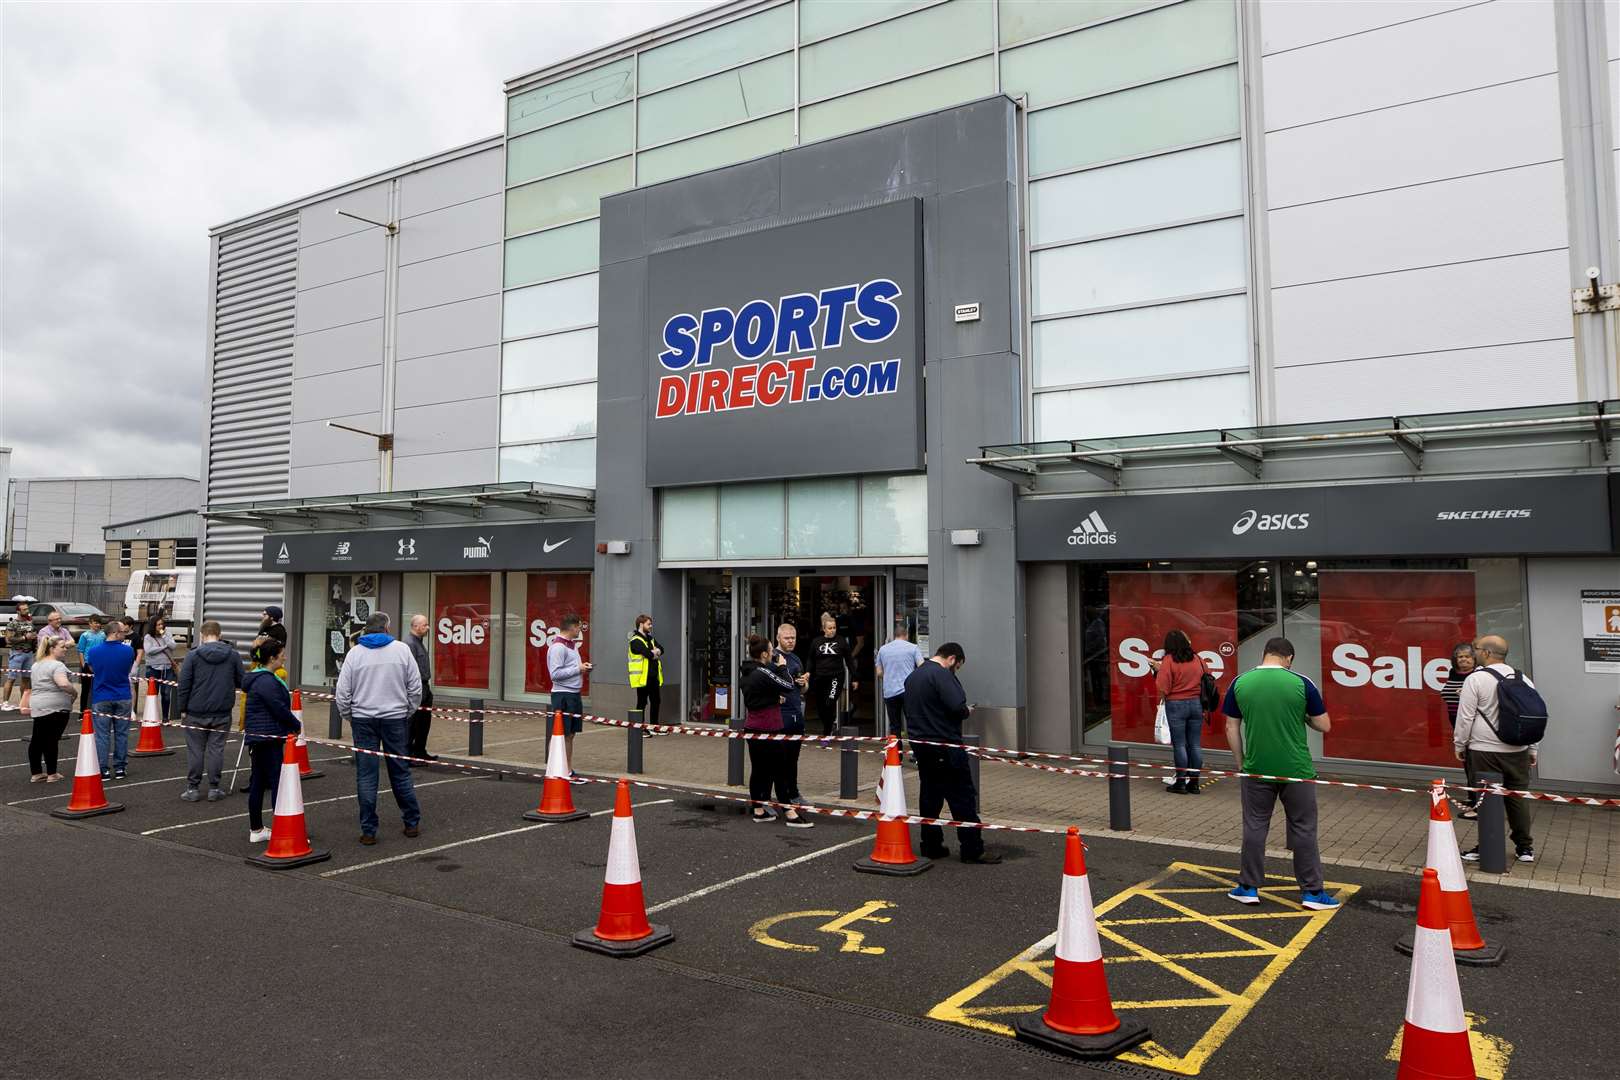 Shoppers at Boucher Retail Park in Belfast queue to enter Sports Direct after the store reopened following lockdown (Liam McBurney/PA)